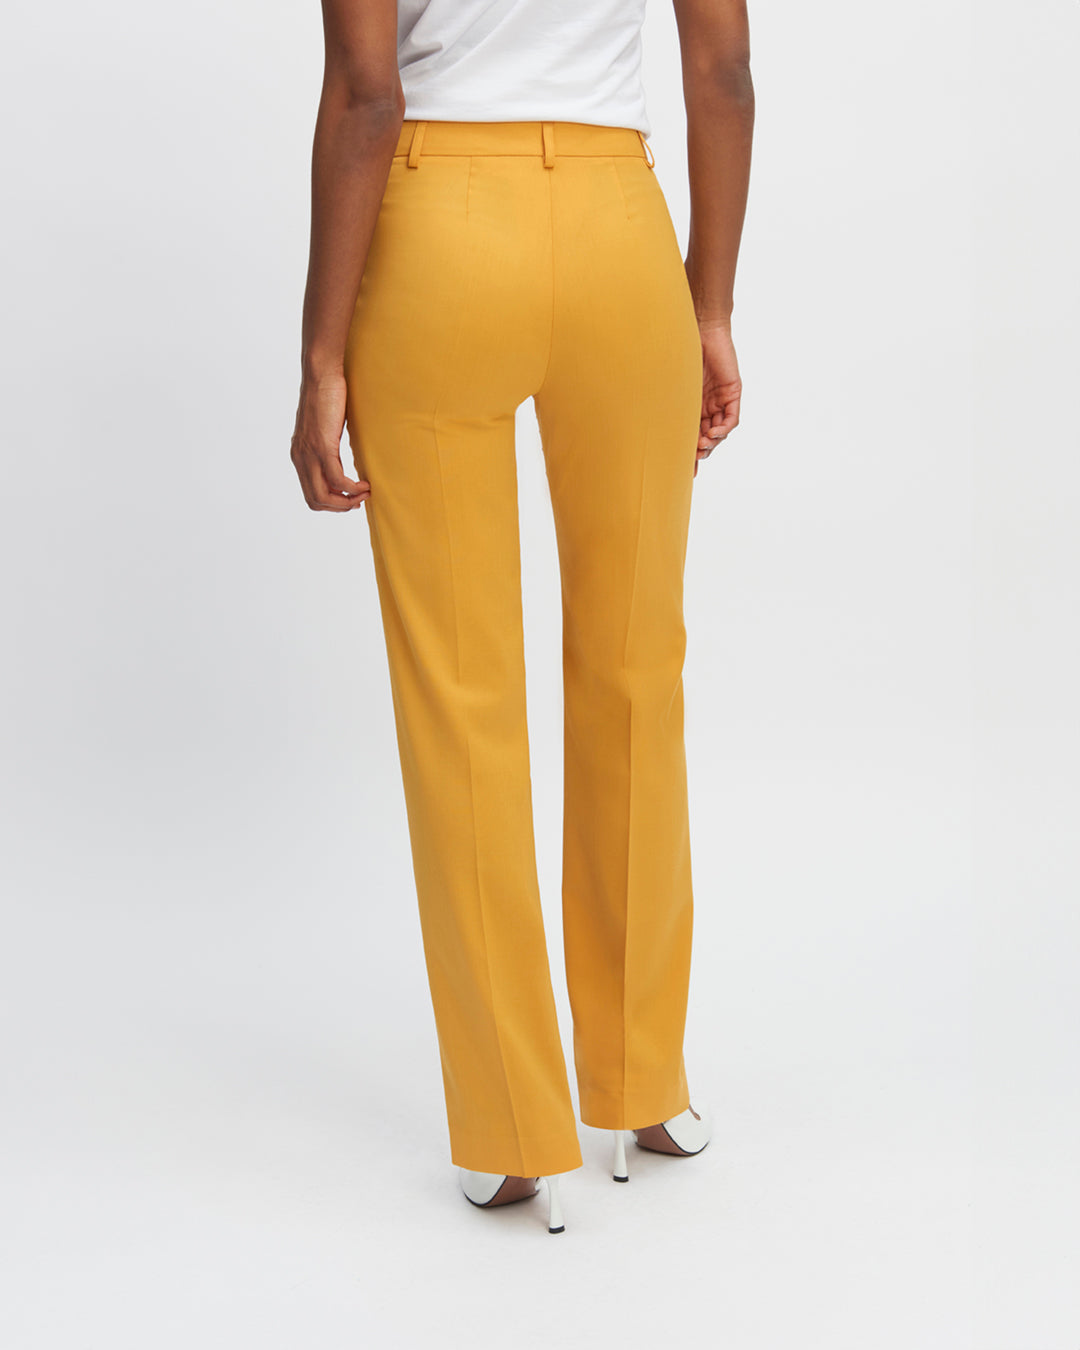 Trousers-yellow-Straight-cut-High-waist-Lined-front-Zip-with-hook-17H10-tailors-for-women-paris-